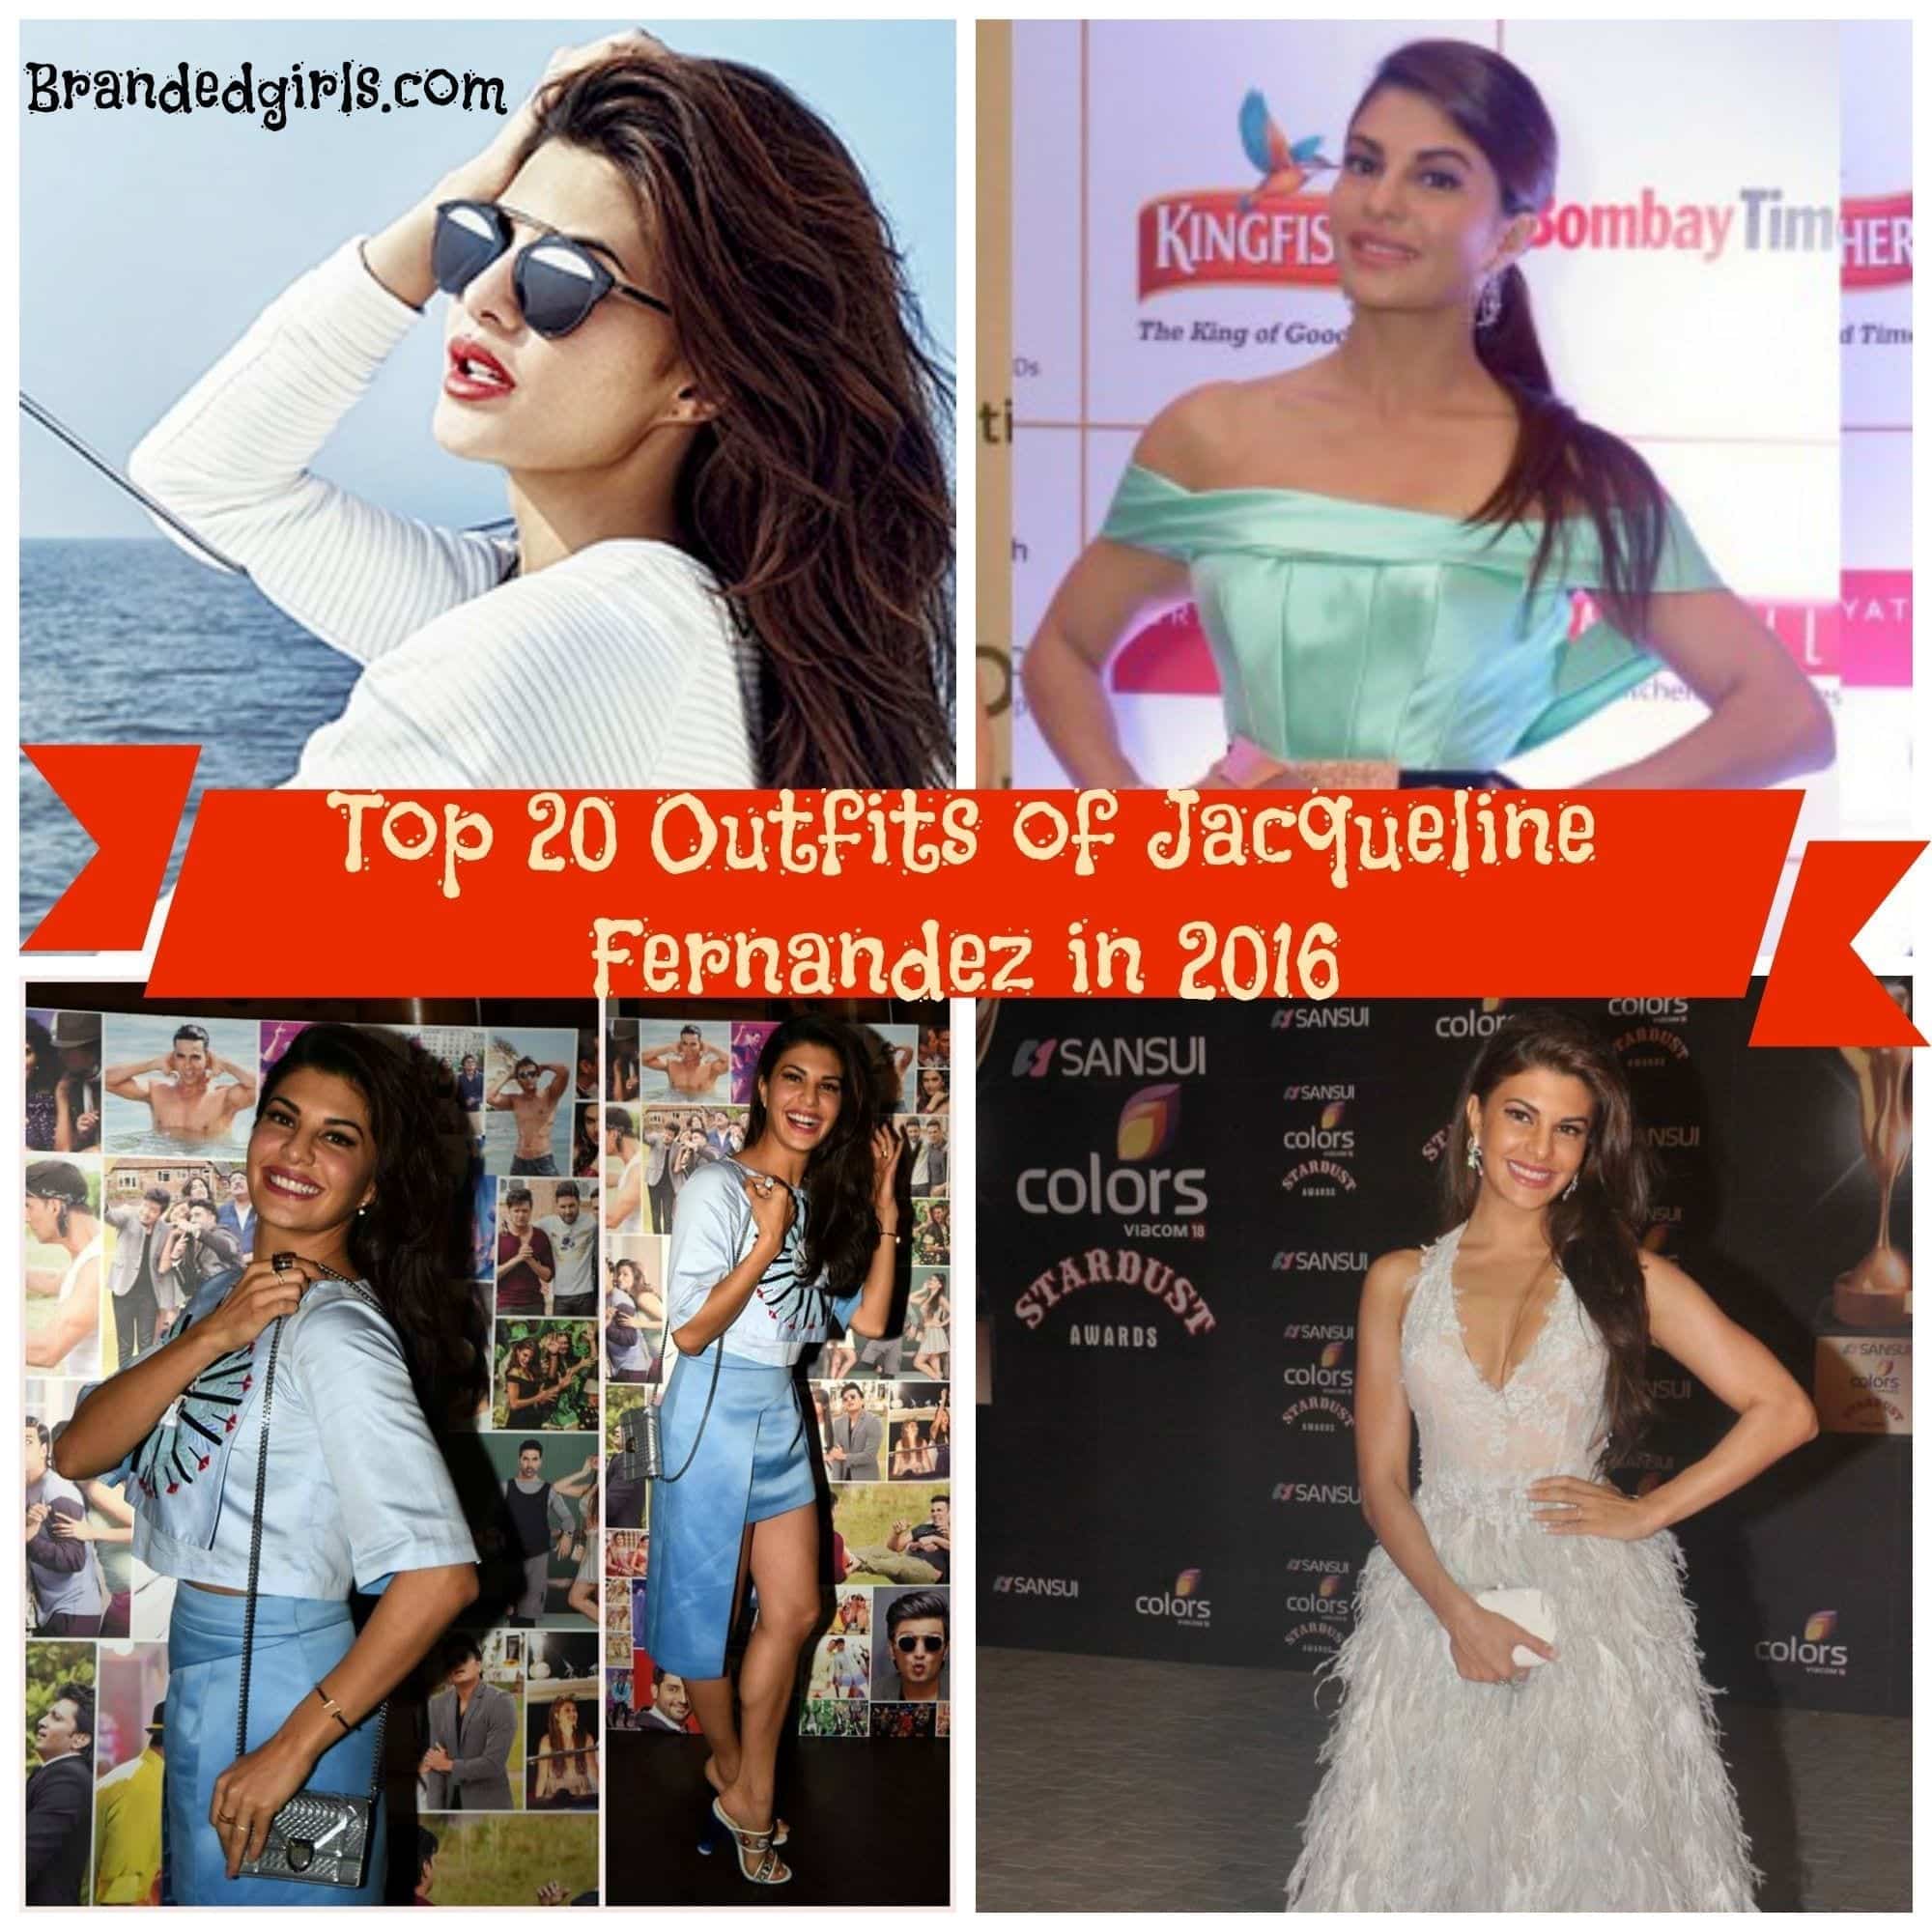 Jacqueline Fernandez Outfits Top 20 Dressing Styles of Jacqueline This Year